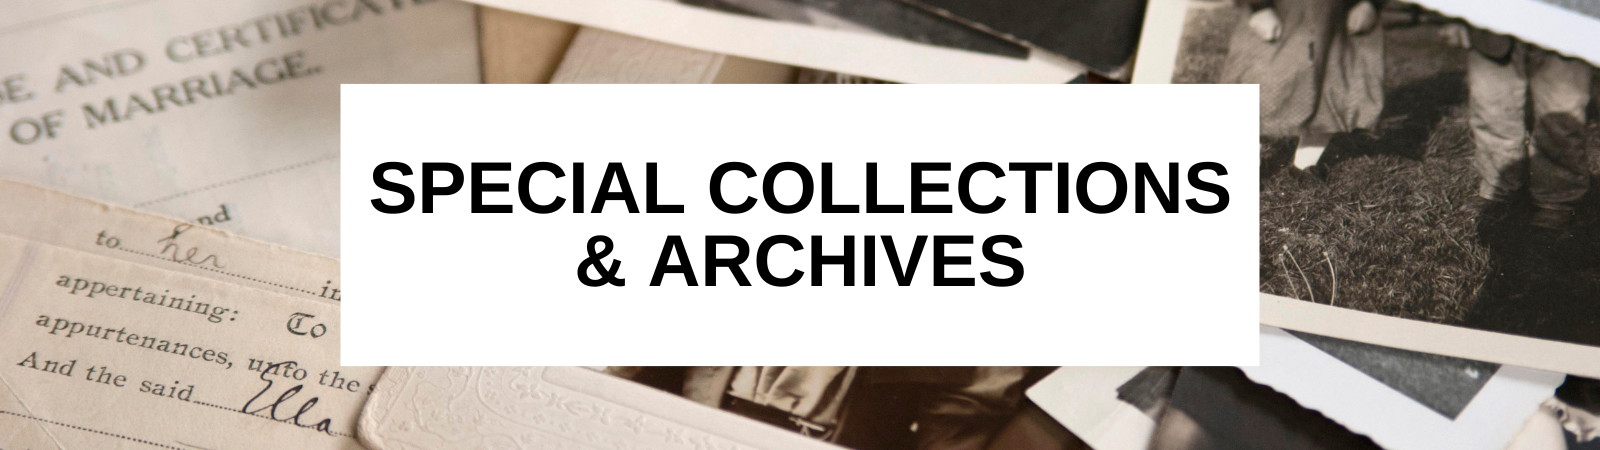 Special Collections & Archives